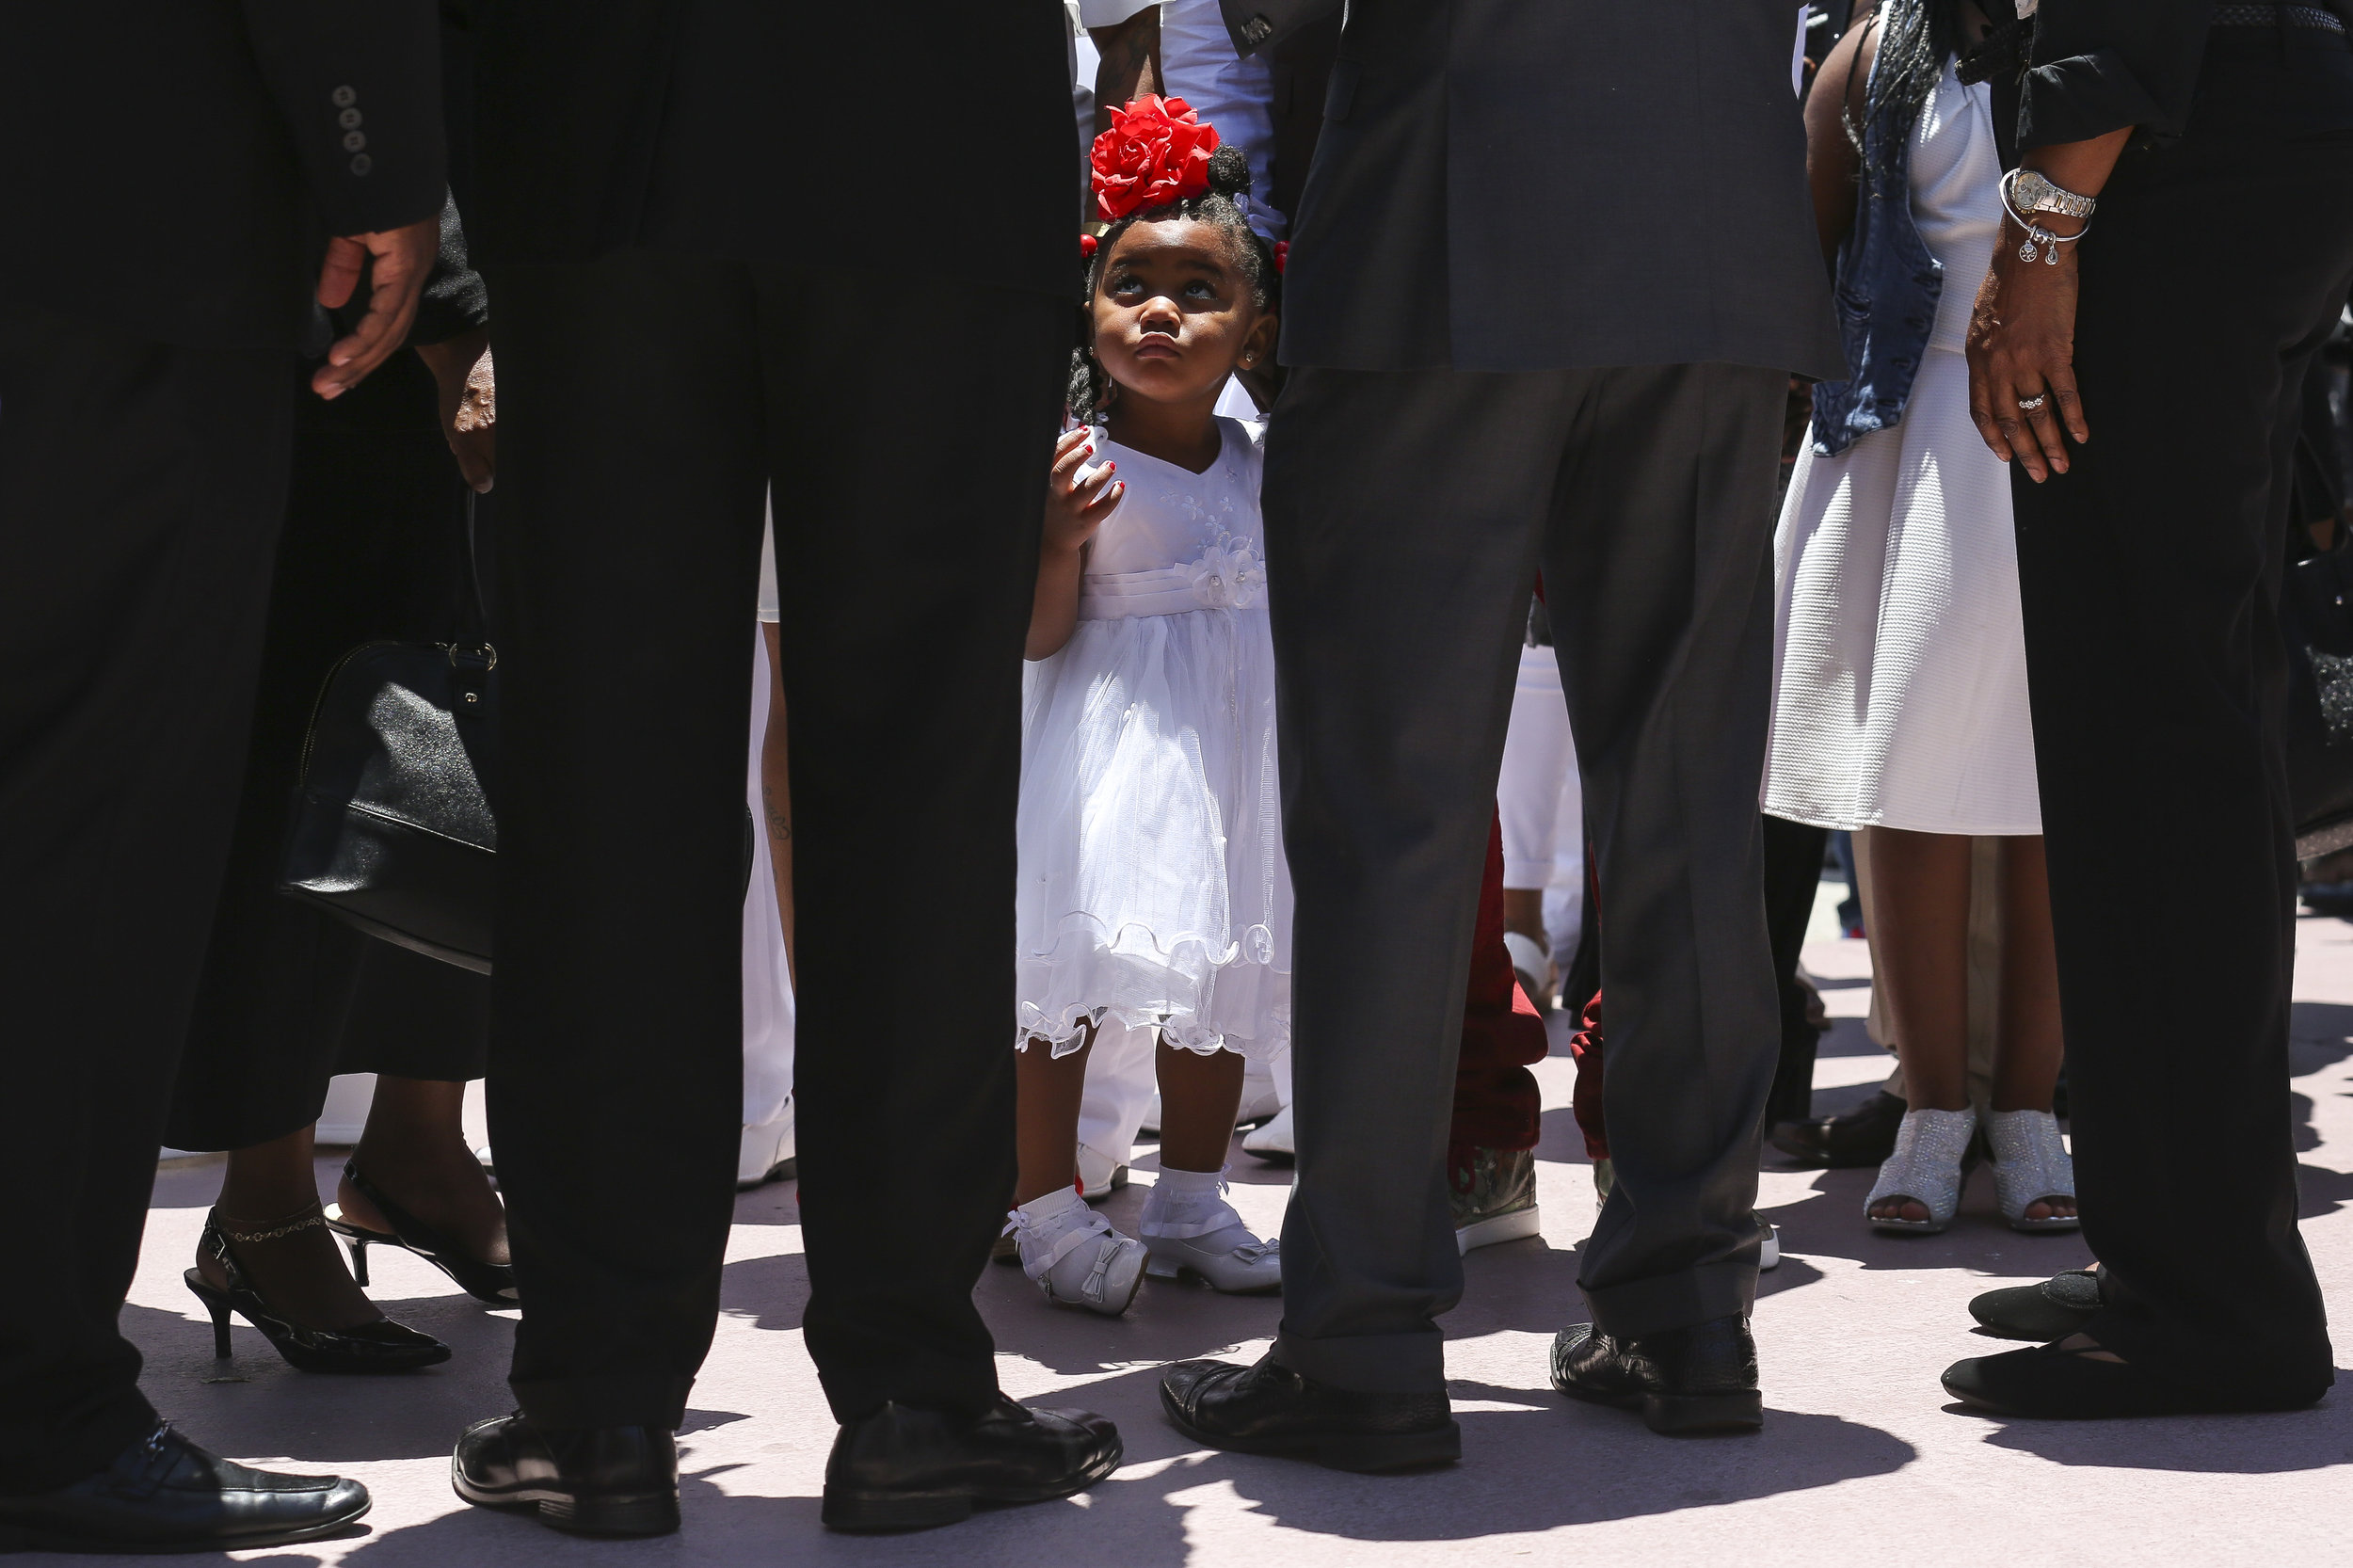  Tedrika King, 2, waits outside before the start of a funeral service for her 13-year-old sister, Tedra King, at Second Baptist Church in Richmond Heights on Saturday, May 6, 2017. Tedra King was a victim to gun violence after being accidentally shot